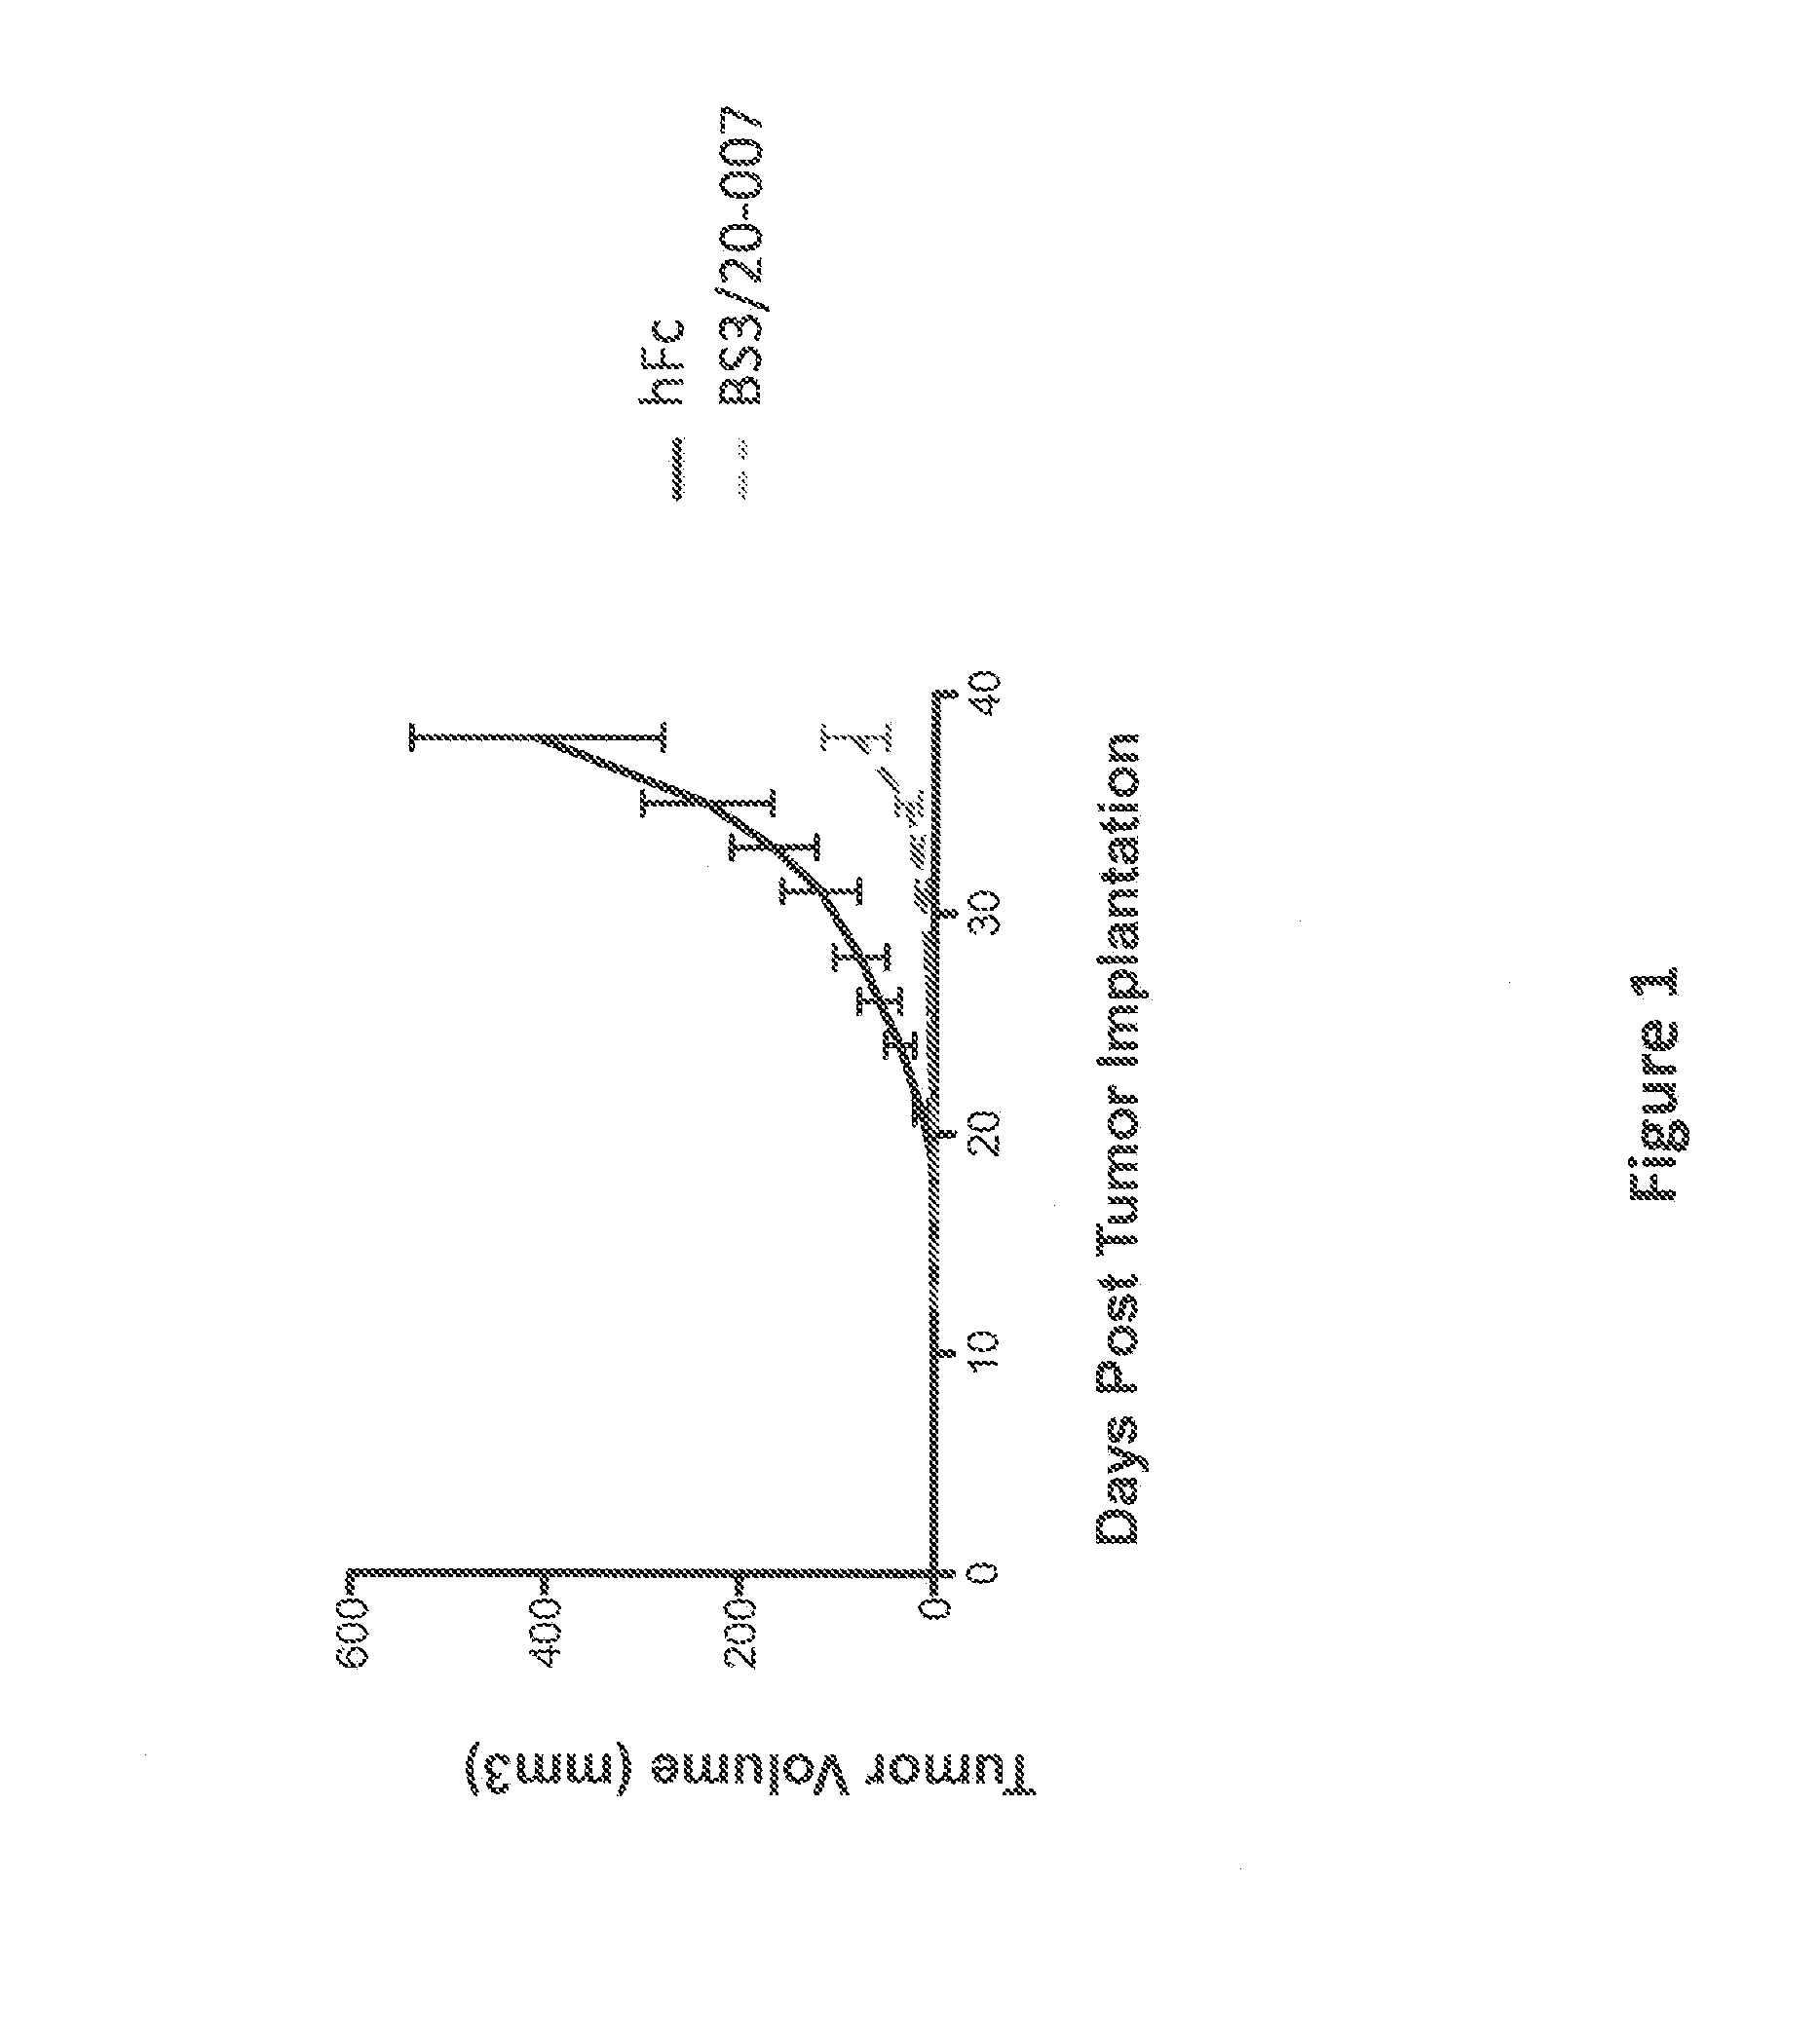 Anti-cd3 antibodies, bispecific antigen-binding molecules that bind cd3 and cd20, and uses thereof